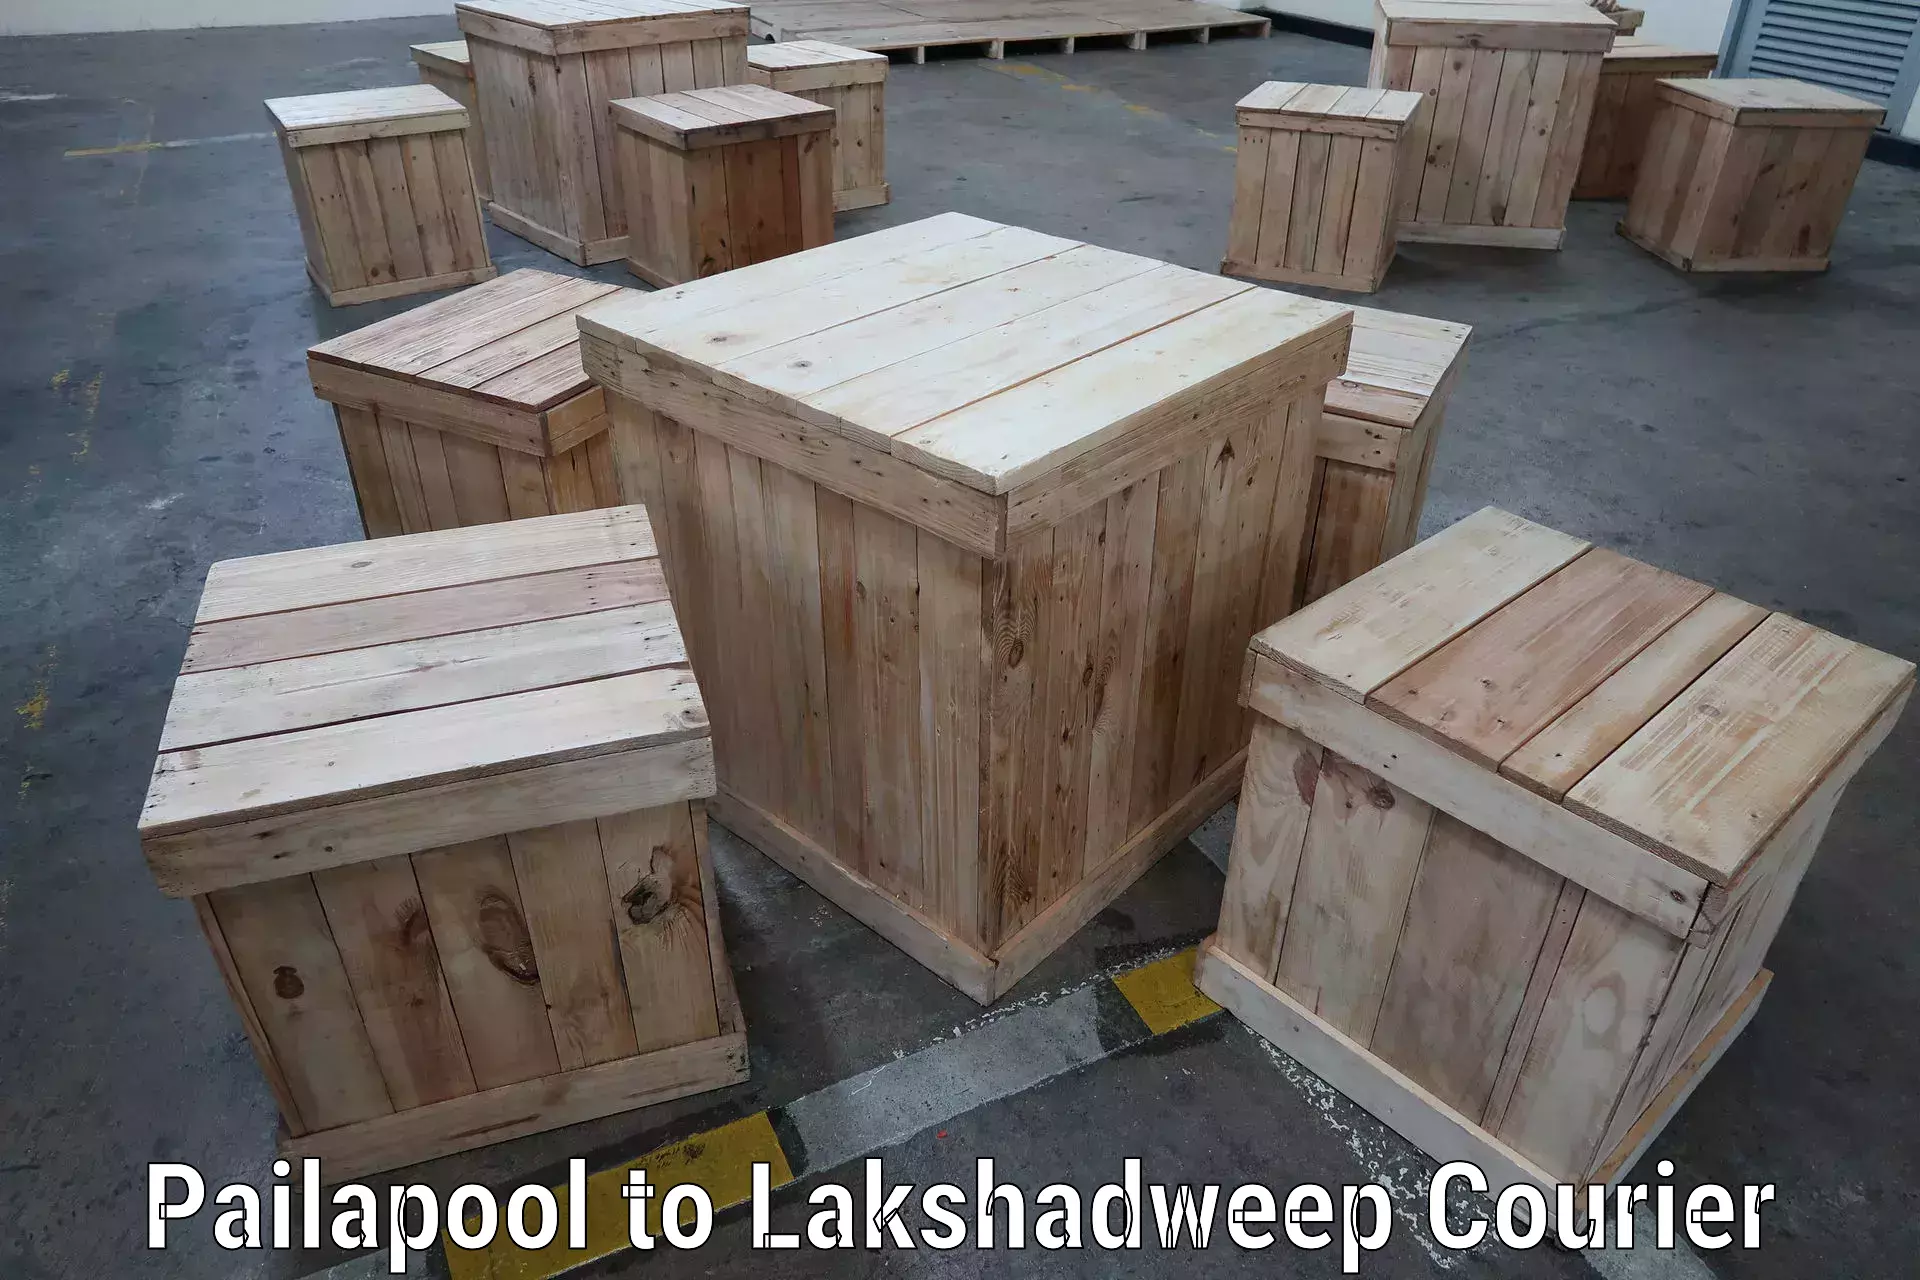 Specialized shipment handling in Pailapool to Lakshadweep